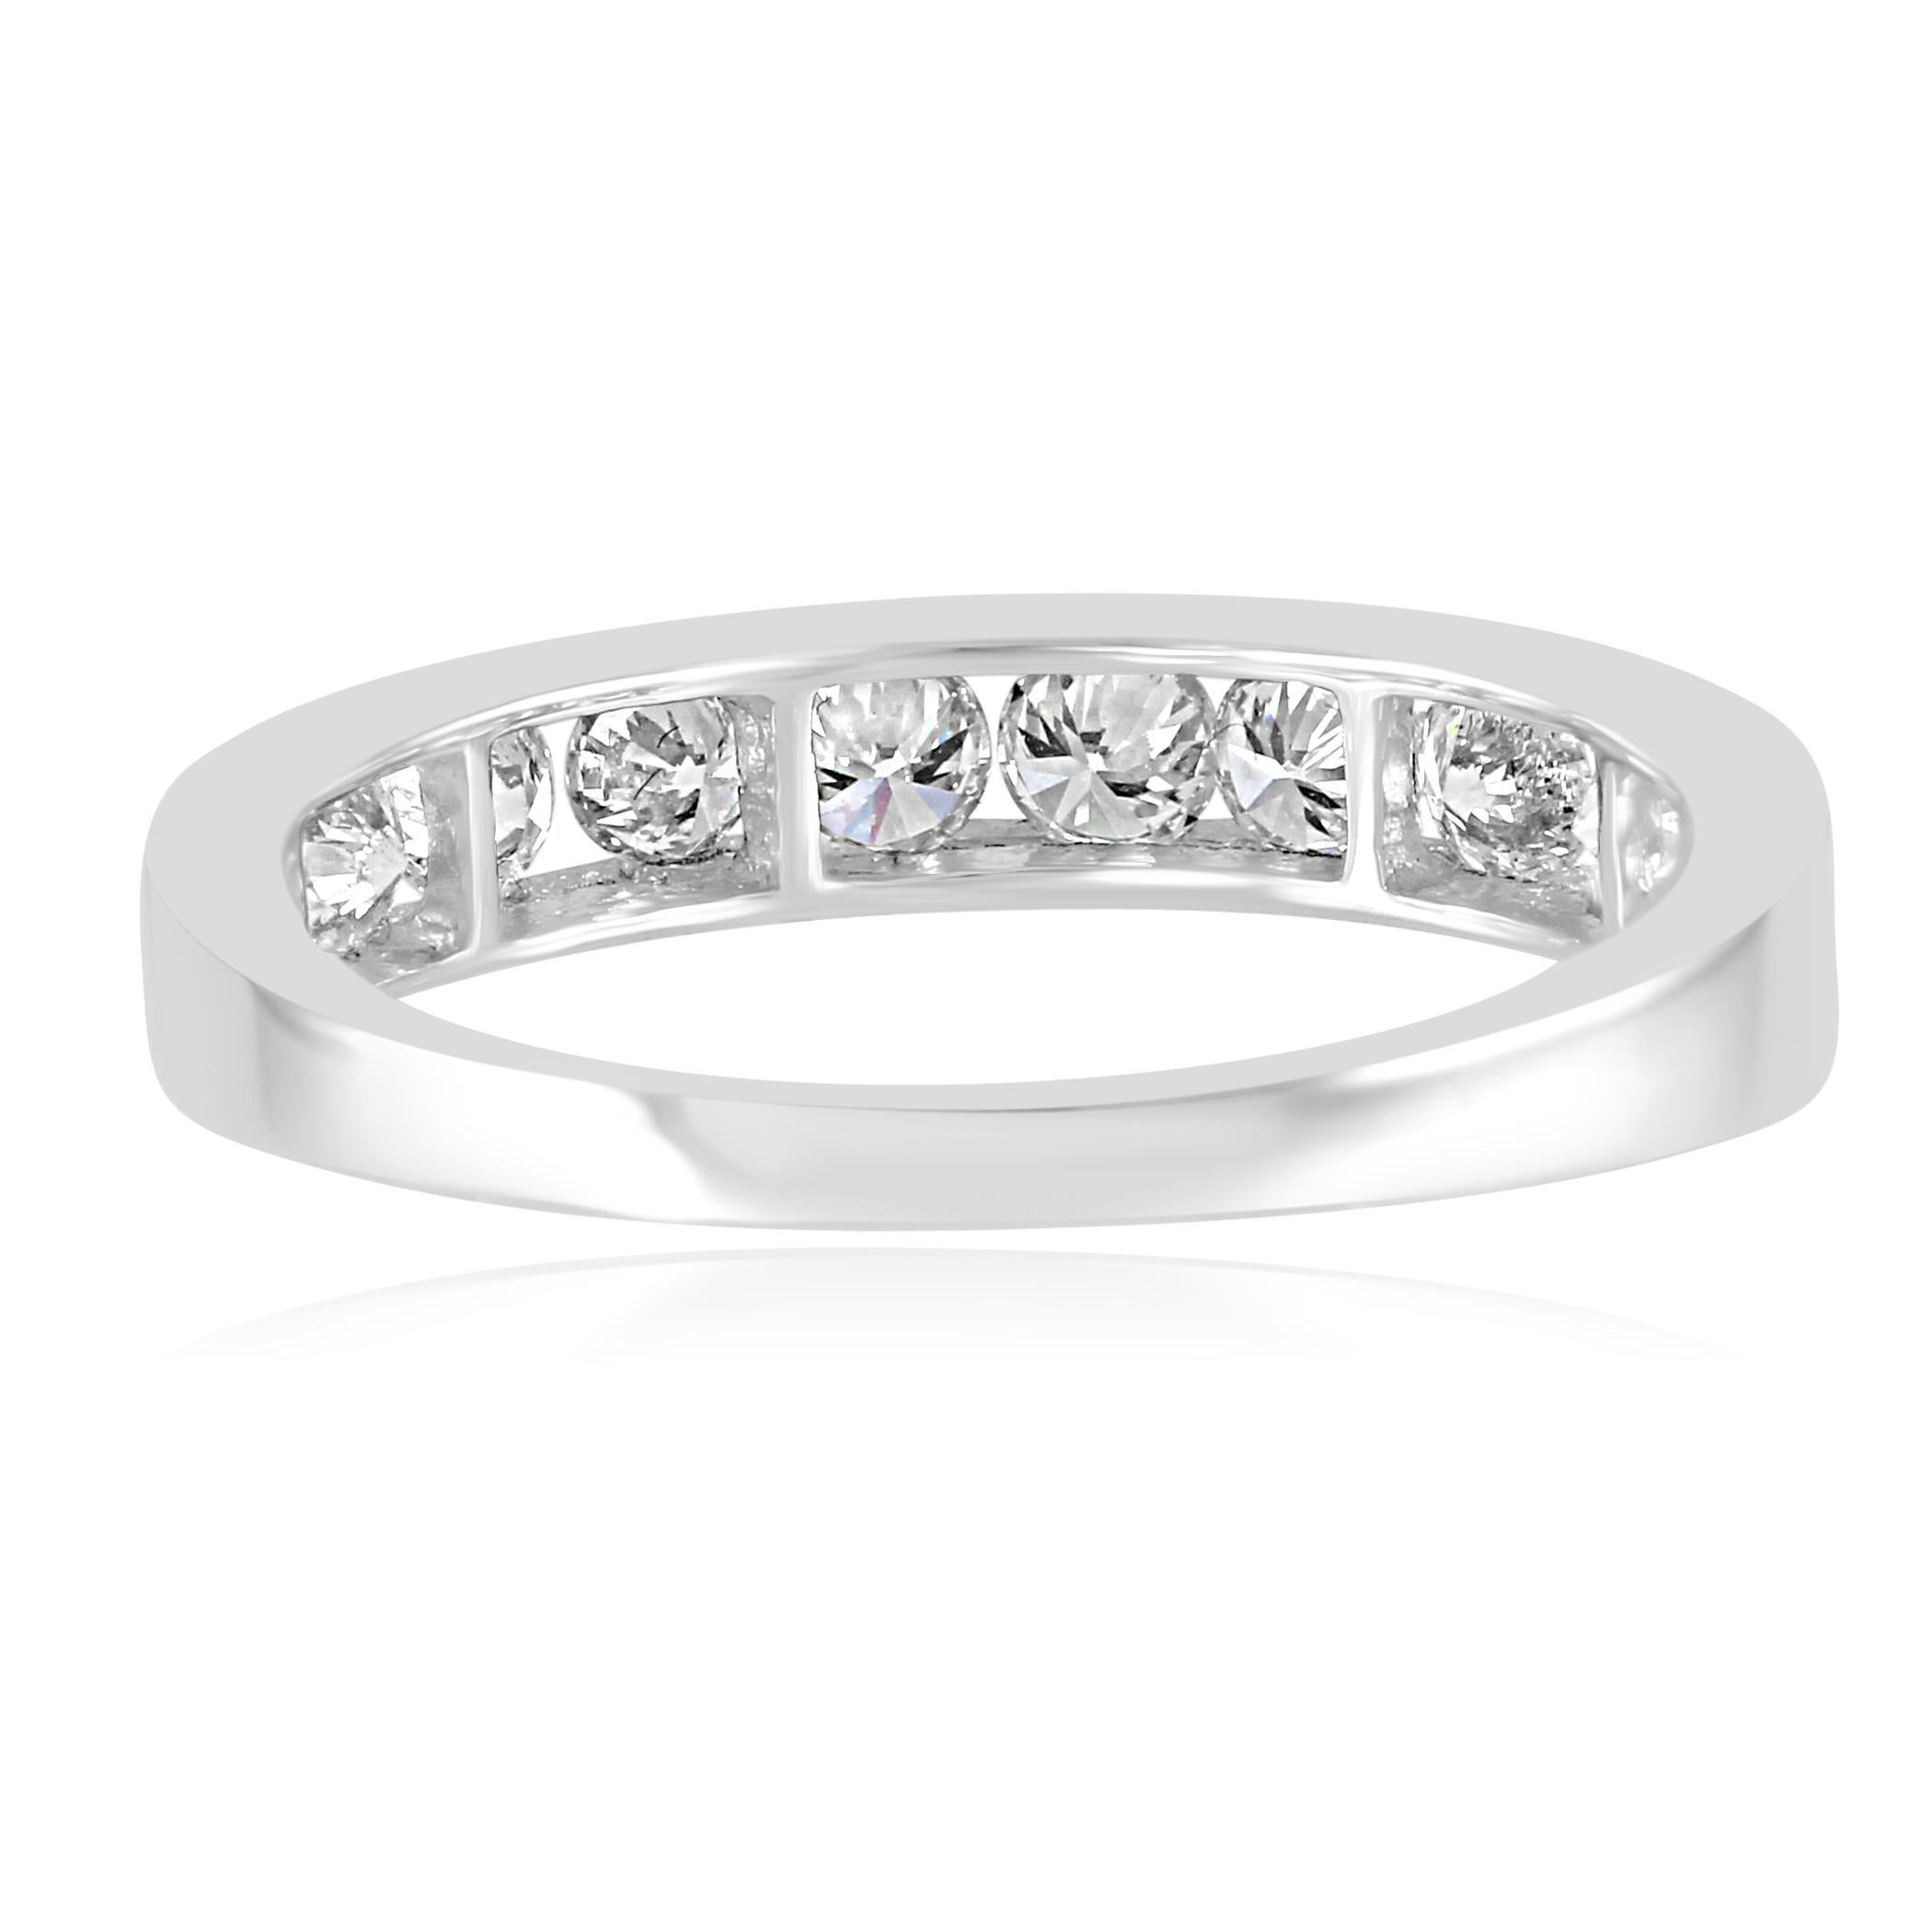 White Round Diamond 1.00 Carat Gold Channel Bridal Fashion Cocktail Band Ring 1